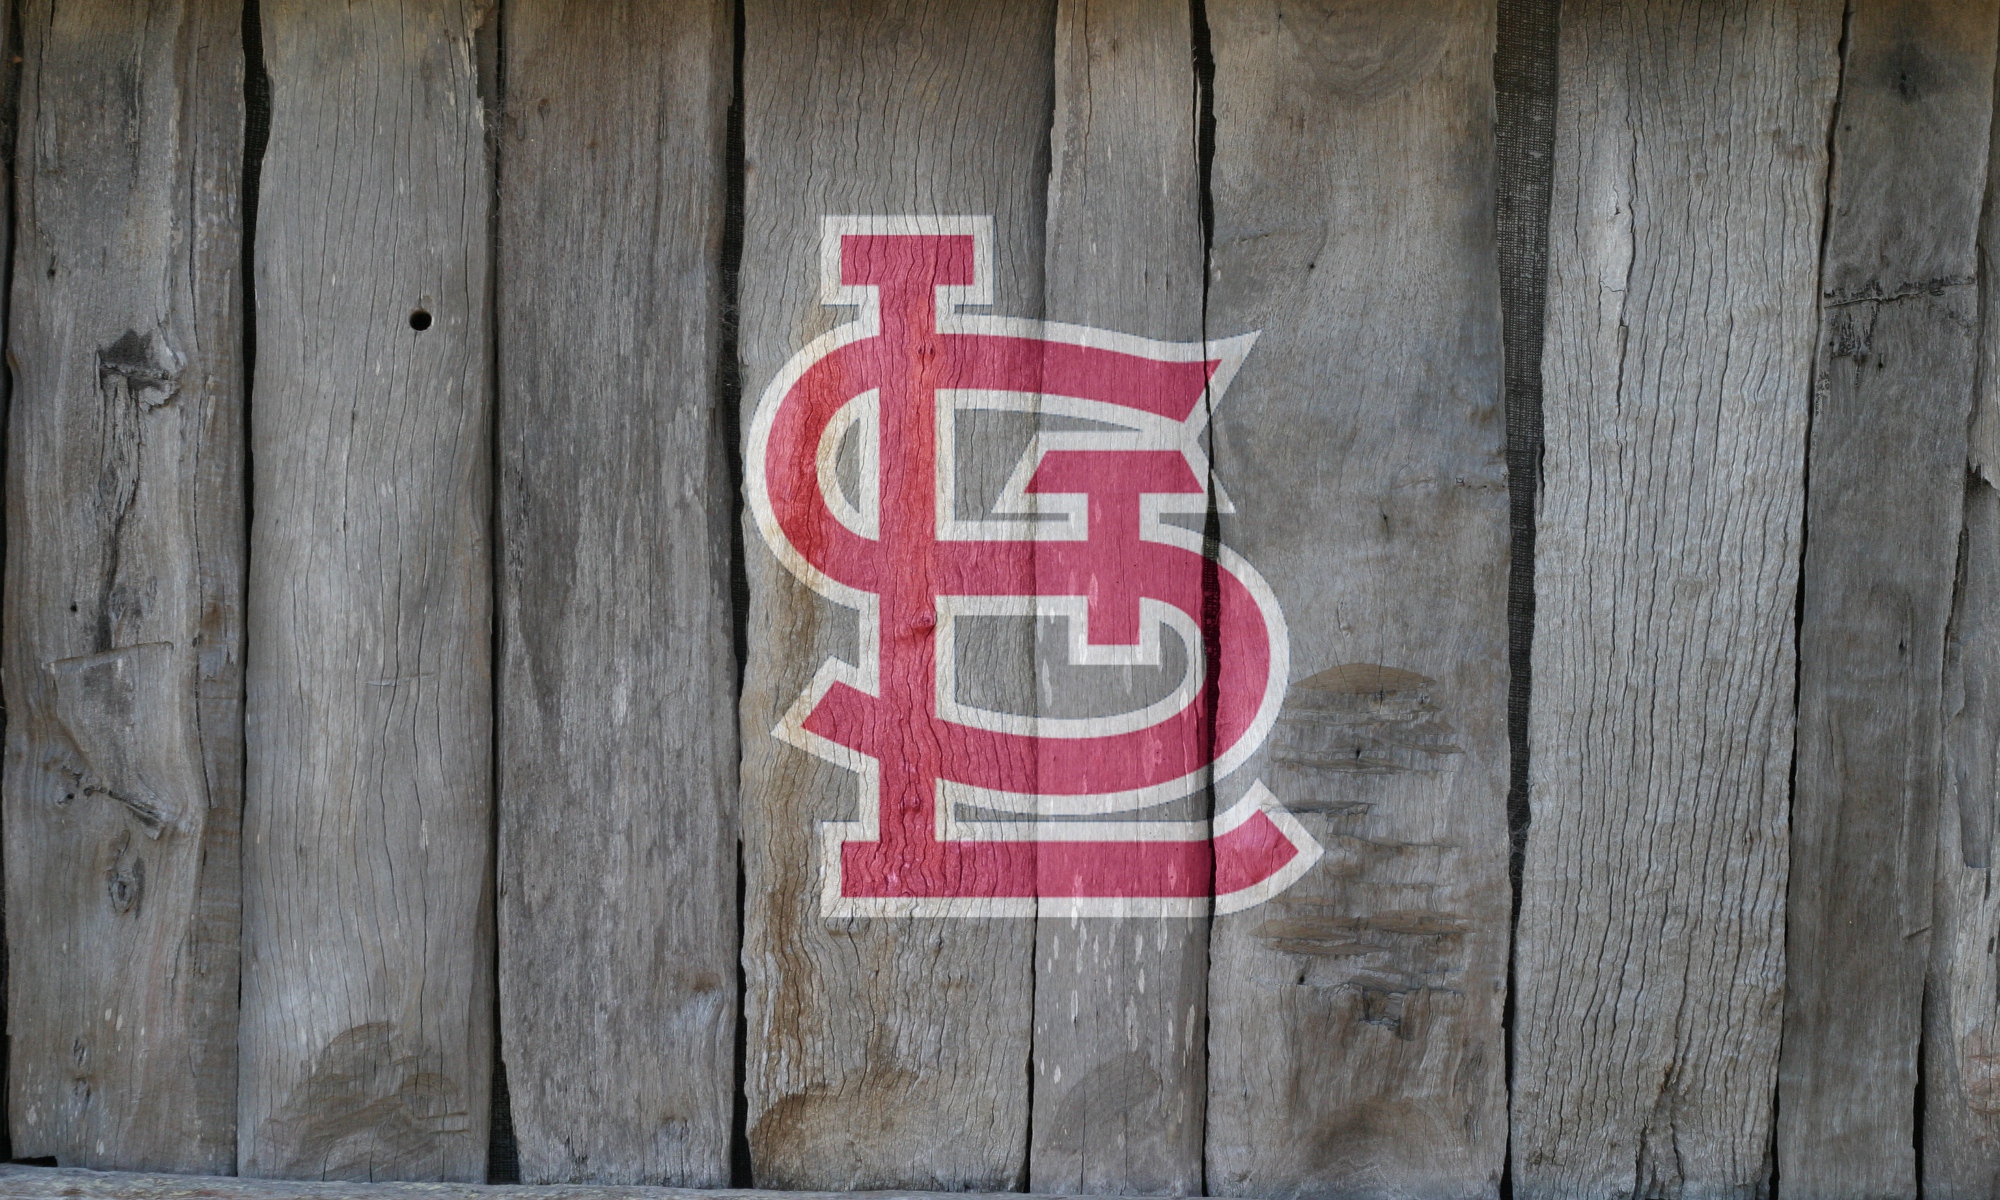 St.Louis Cardinals Wallpapers HD | Full HD Pictures